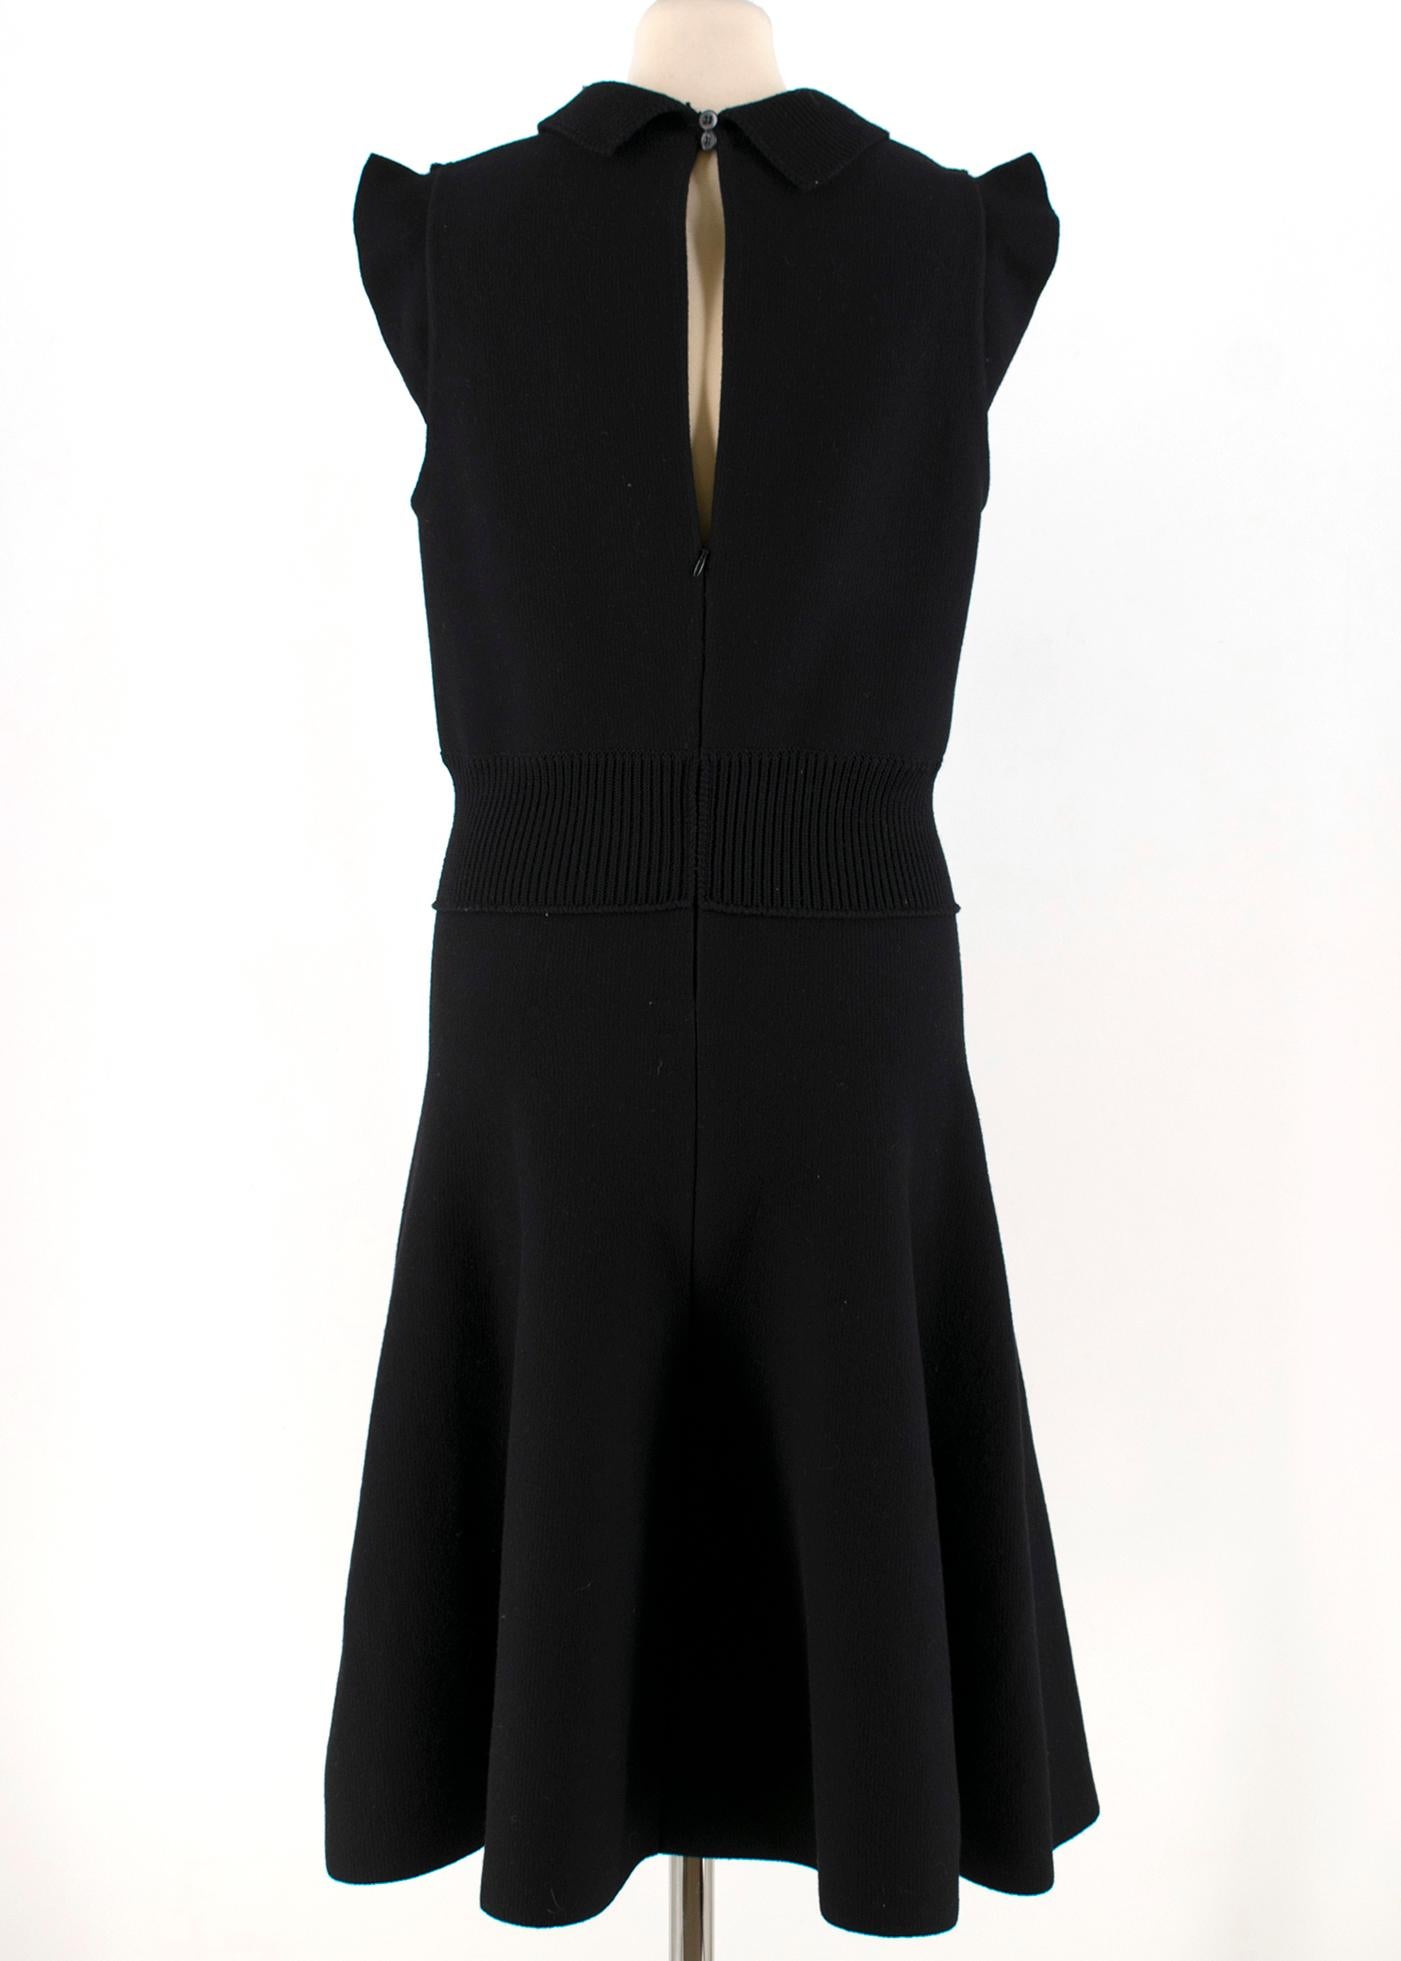 Prada Black Wool-blend Knit Dress US 8 In Good Condition For Sale In London, GB